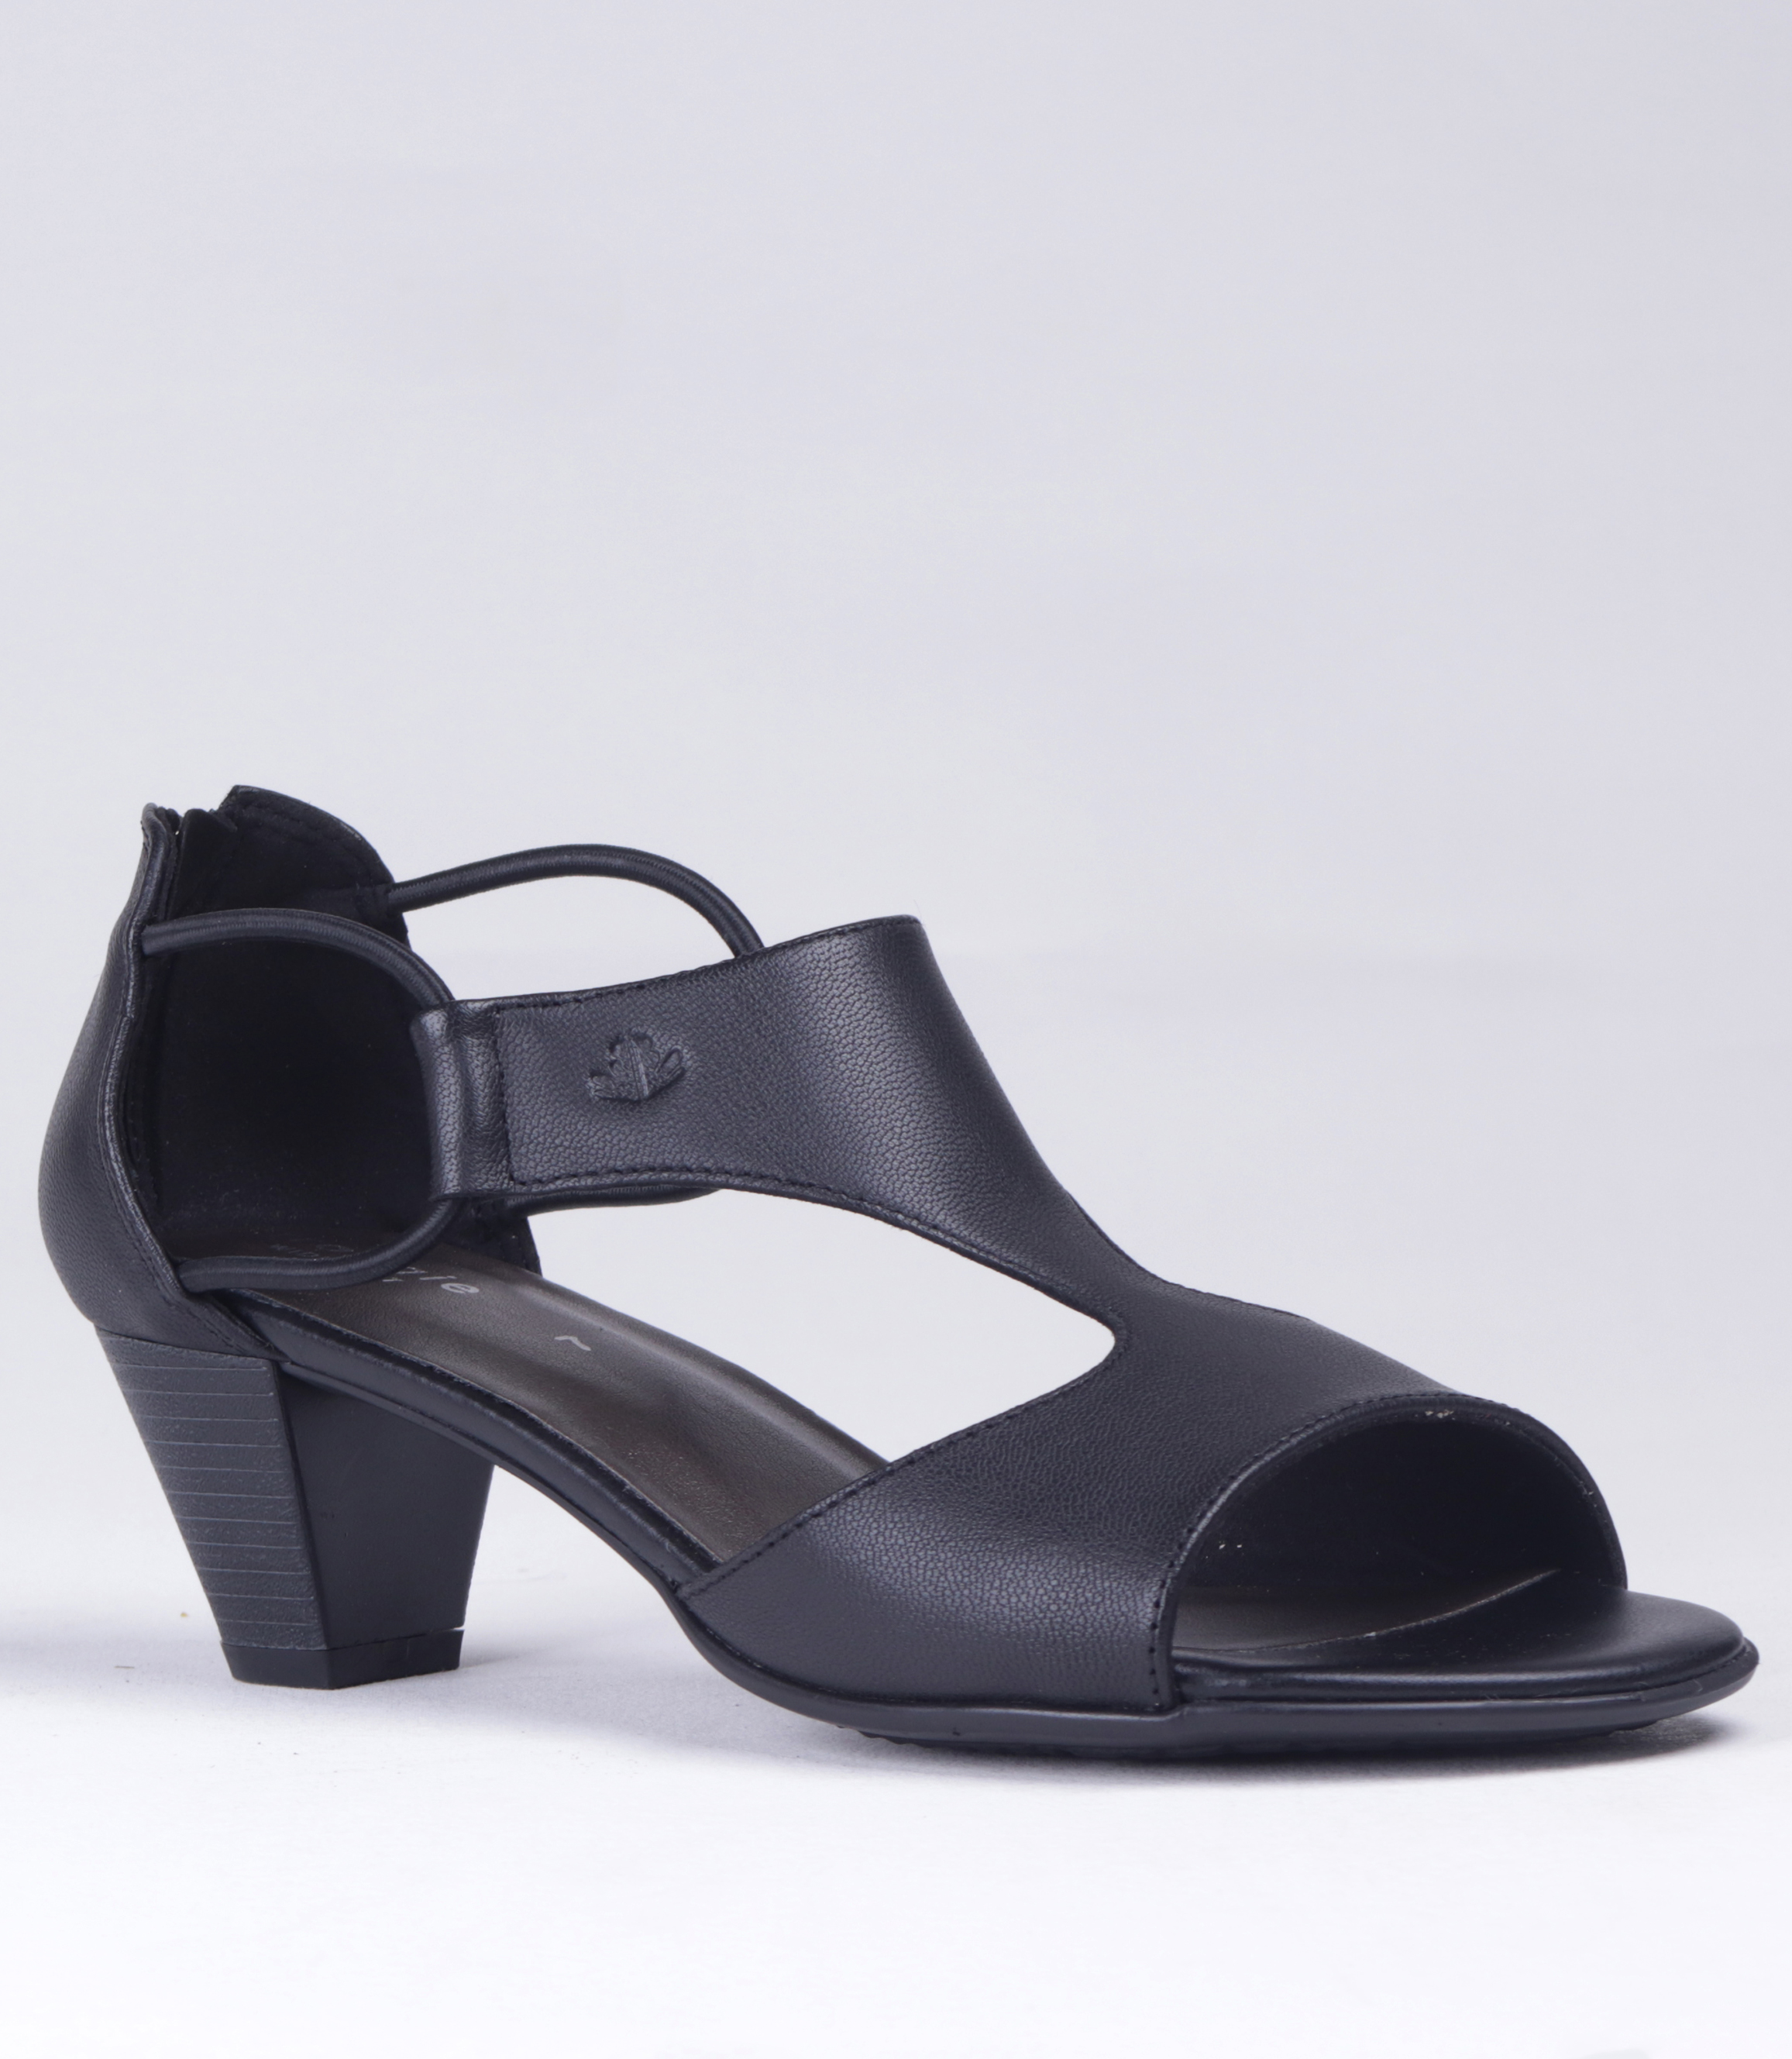 FROGGIE BLACK LEATHER WIDER FIT T- BAR HEEL | Rosella - Style inspired ...